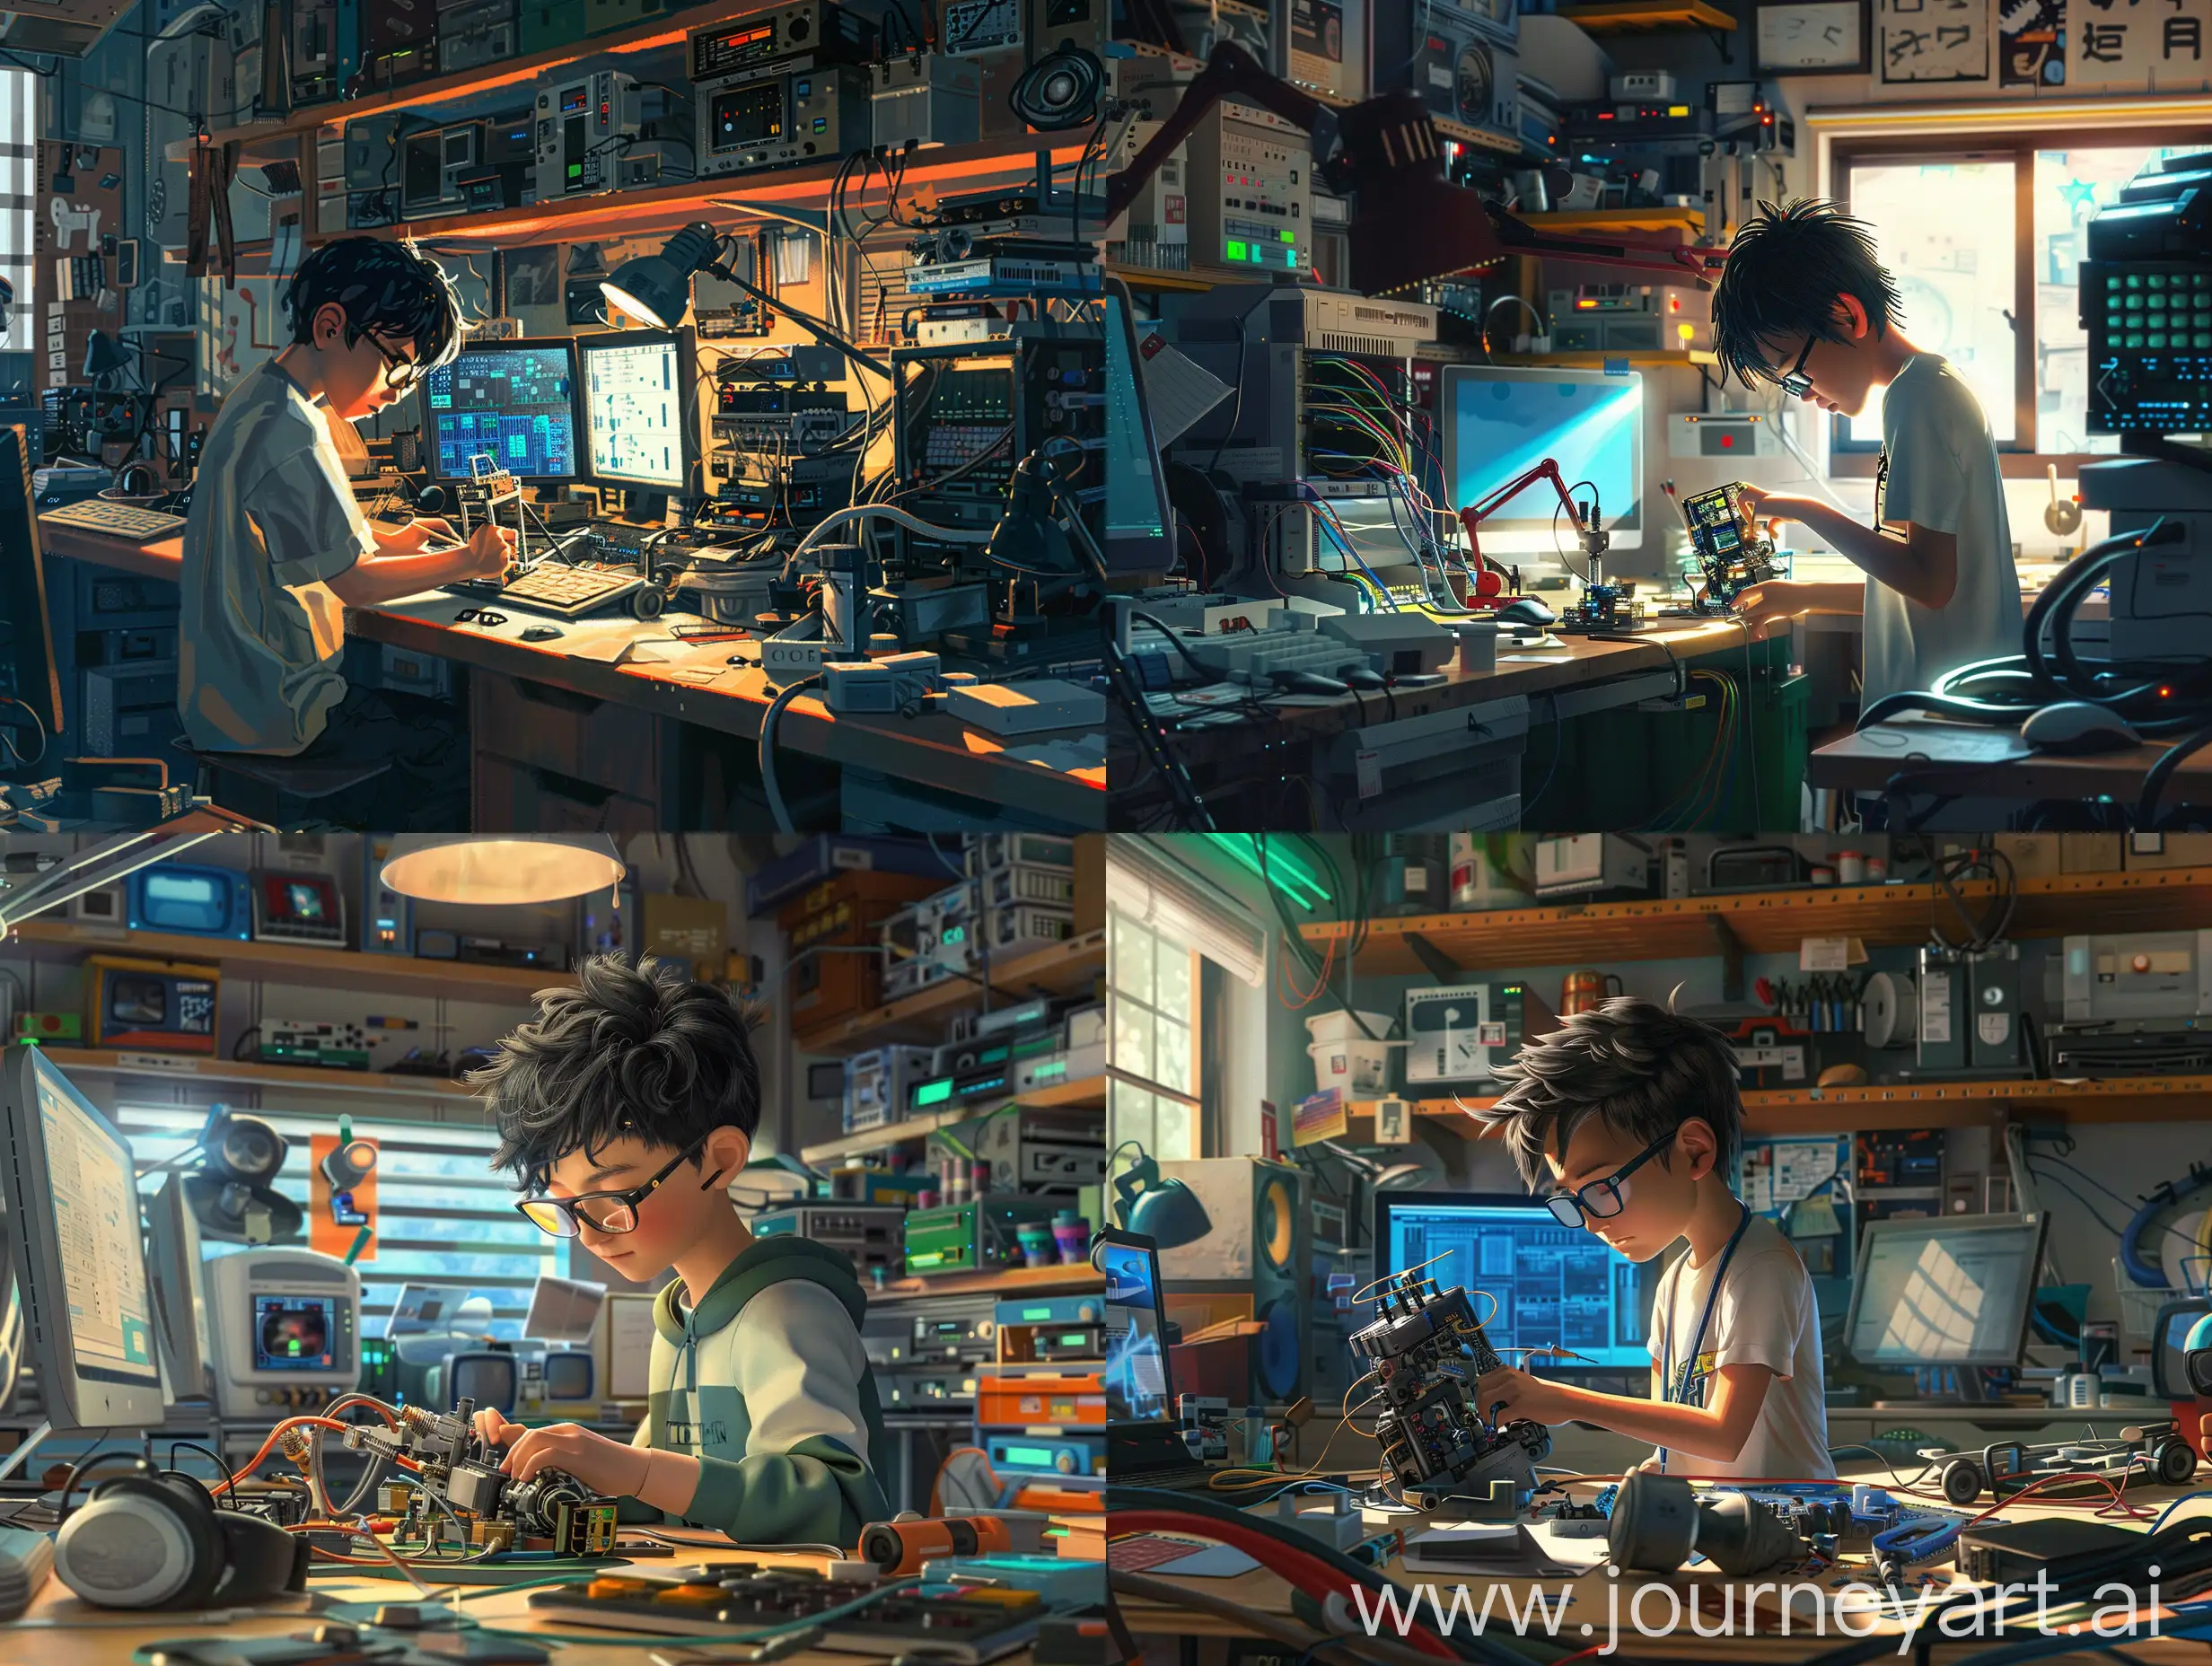 Young-Inventor-Building-Mechatronic-Device-in-Garage-with-Computers